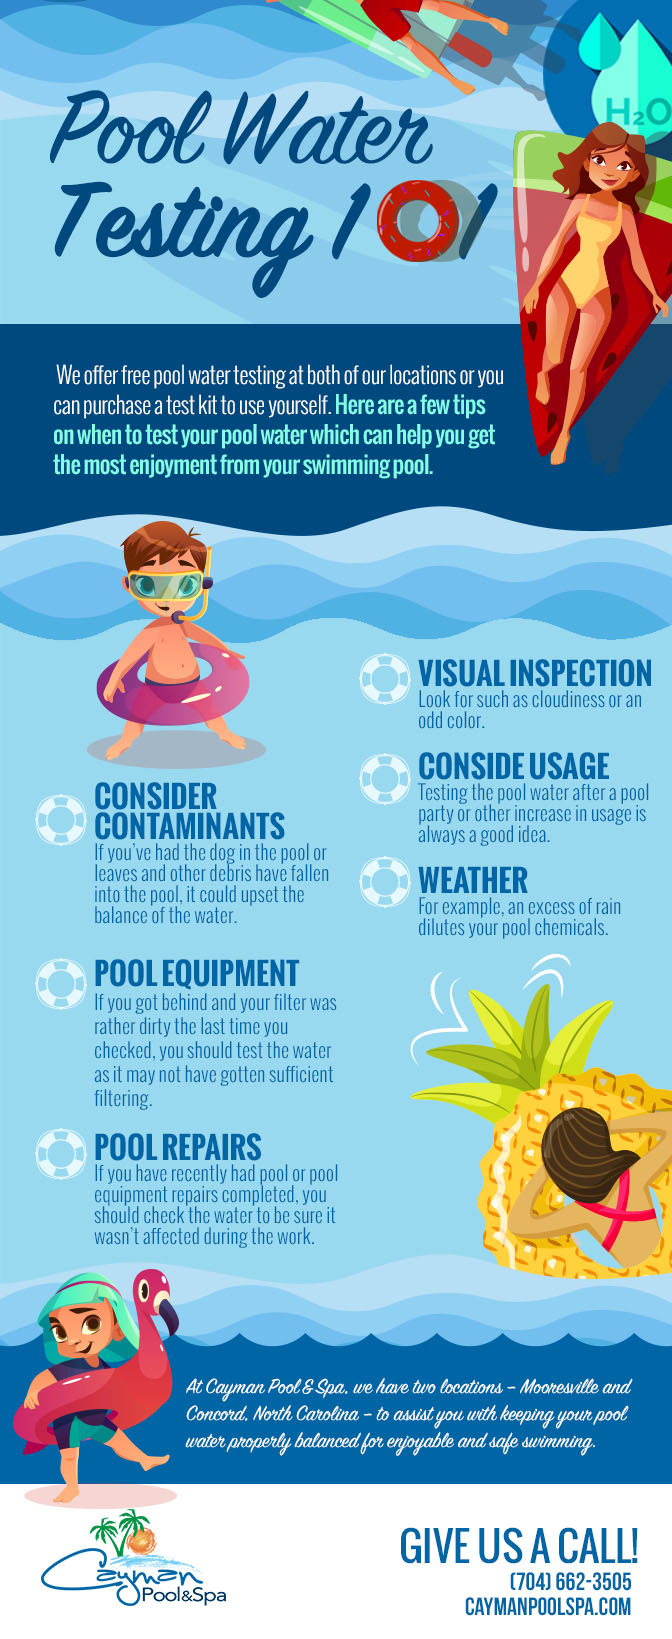 Learn more about the importance of pool water testing.